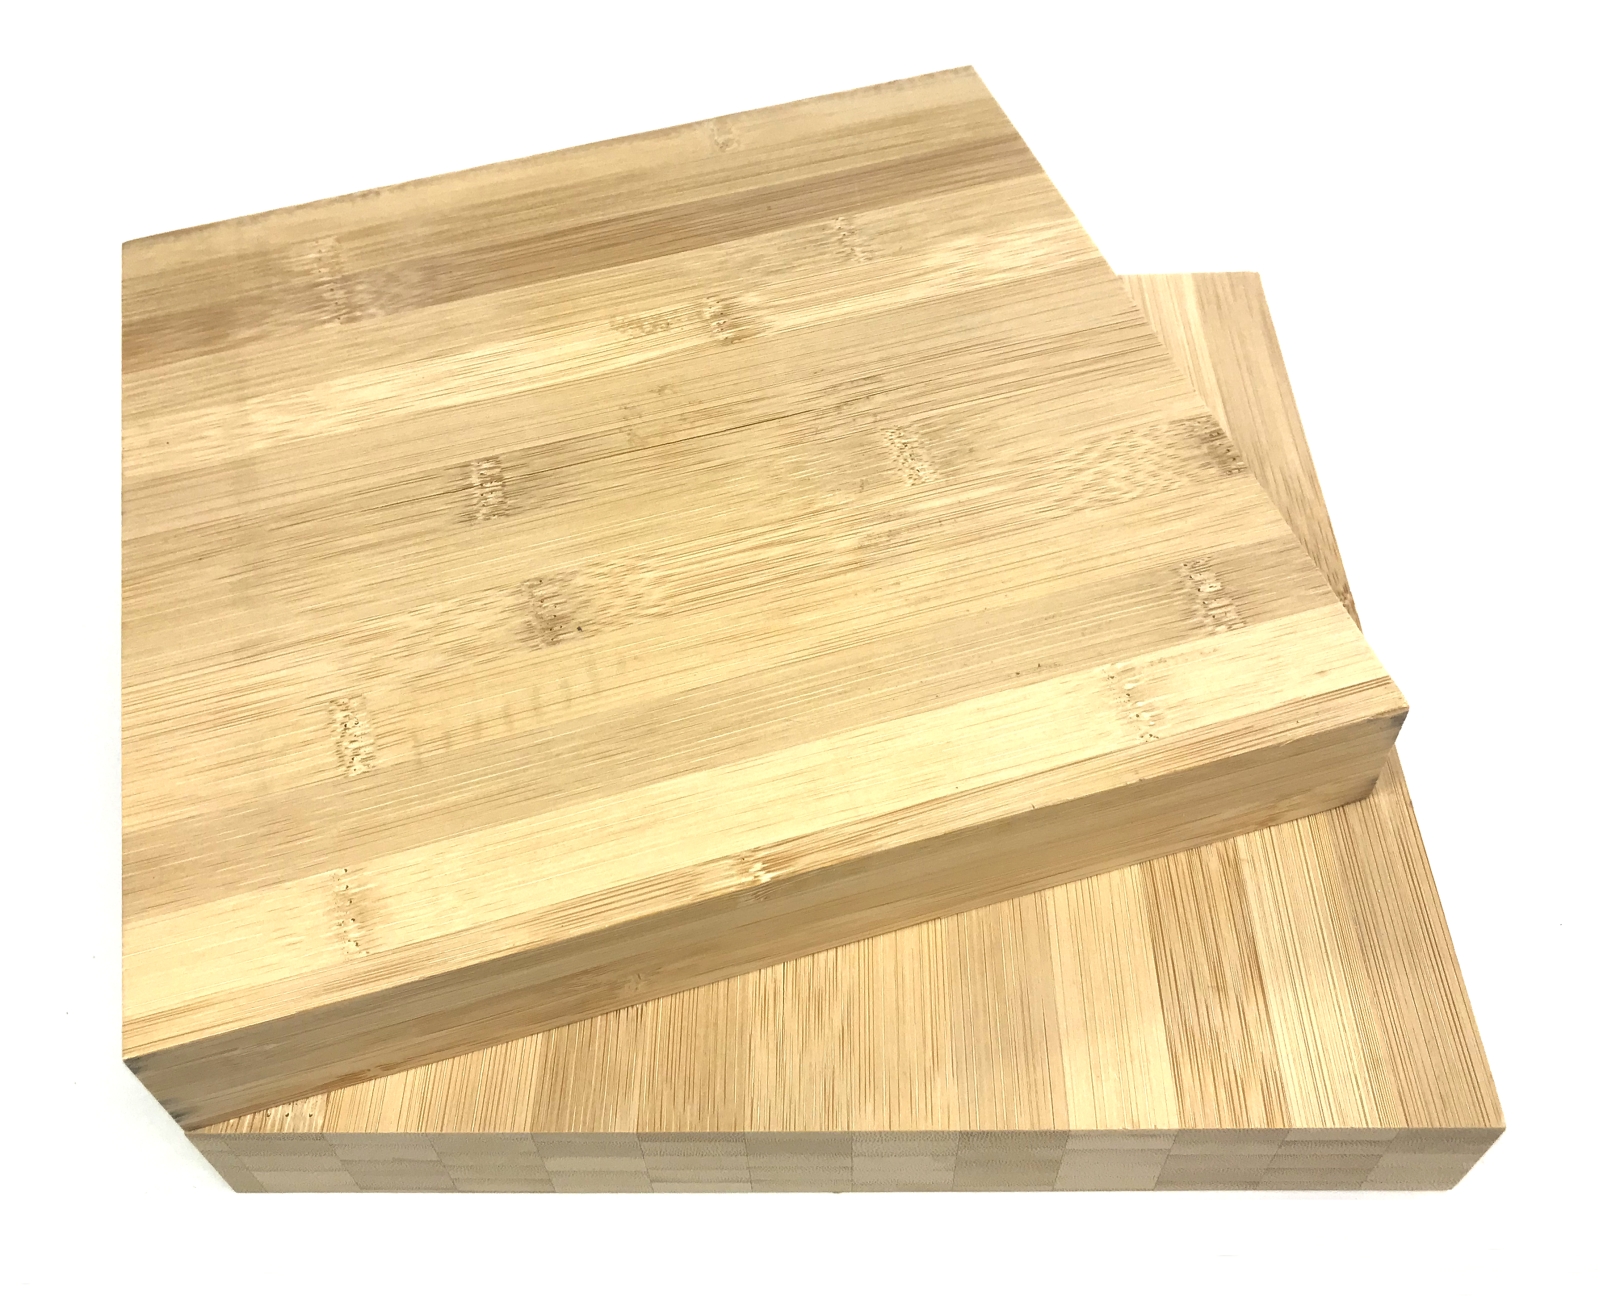 In a similar way to wood, bamboo can be used to manufacture sturdy panels.